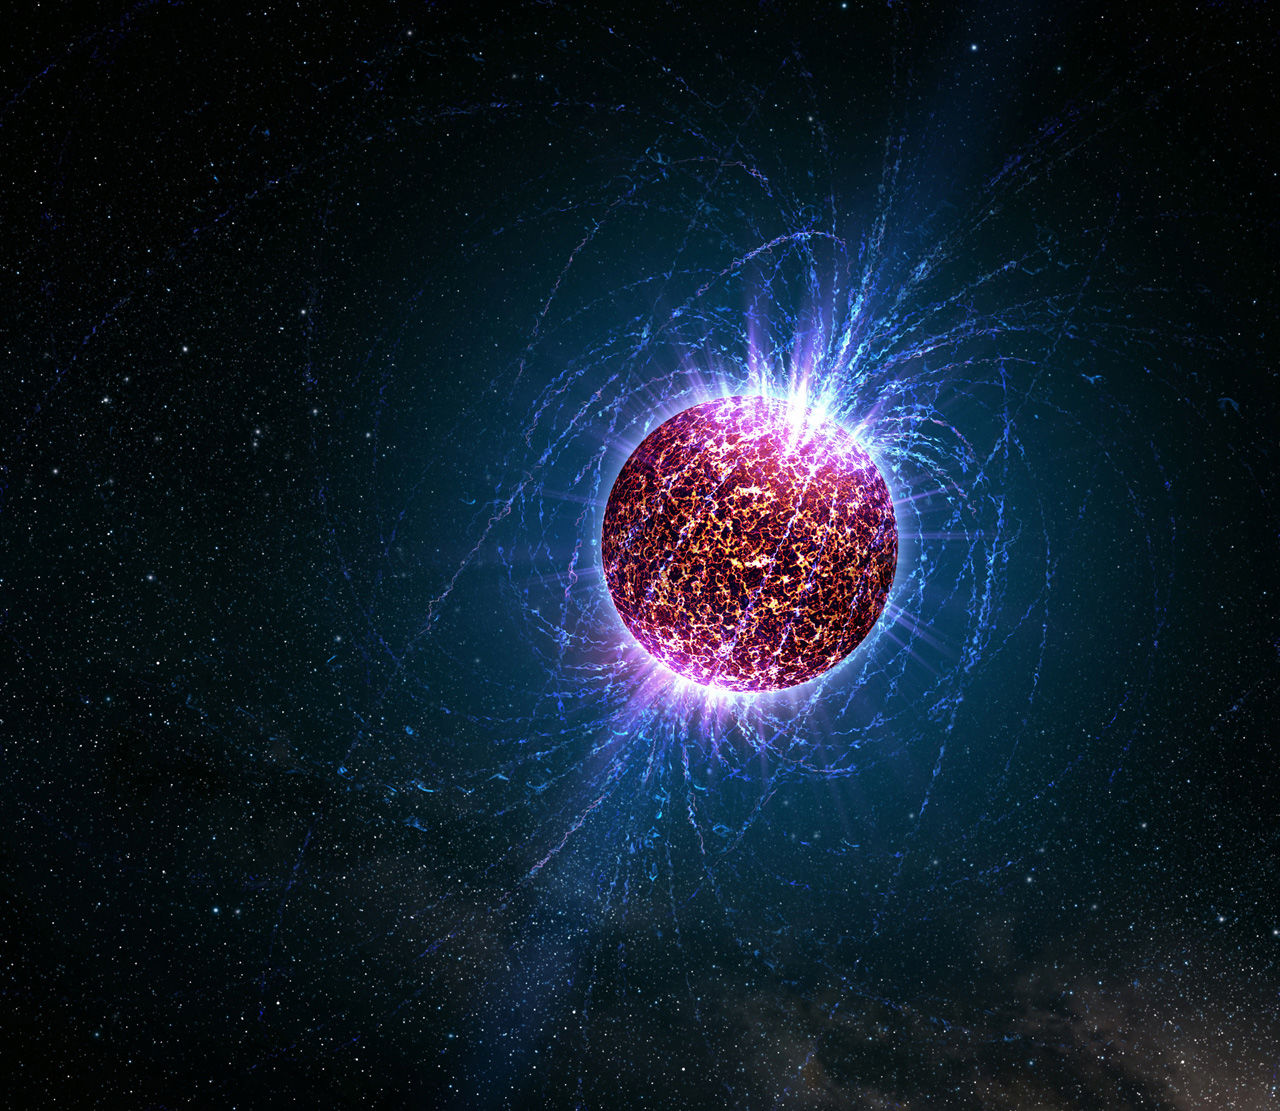 Artwork depicting the magnetic field surrounding a neutron star. Credit: Casey Reed / Penn State University